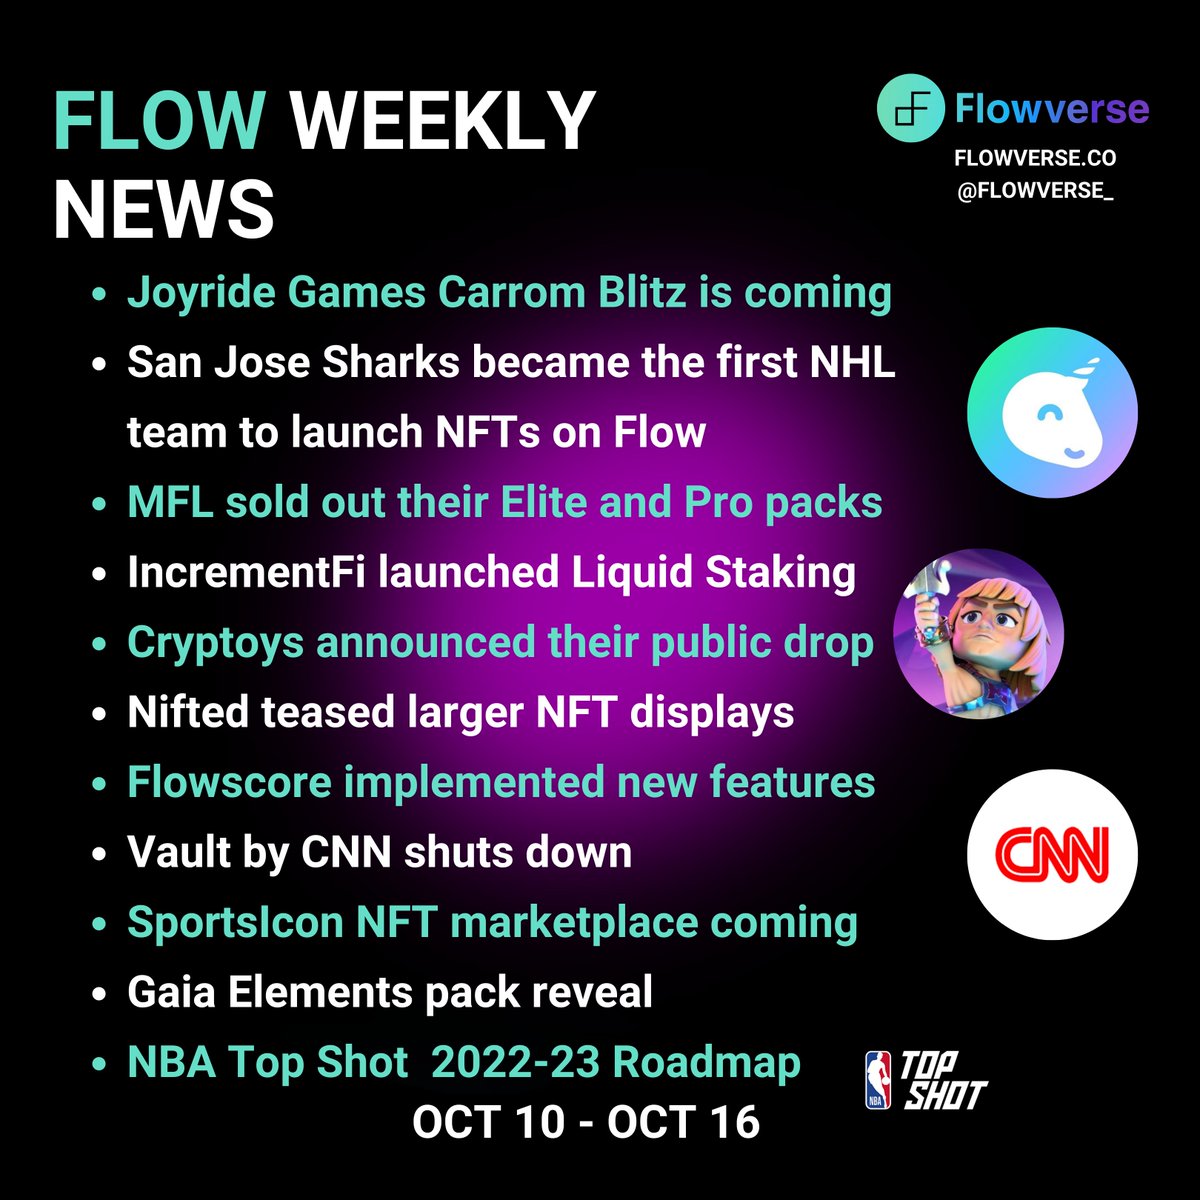 📰 Weekly Recap for @flow_blockchain Oct 10 - Oct 16 ✅ @onjoyride launching new game ✅ @SanJoseSharks first NHL team on Flow ✅ @playMFL sell out Elite & Pro packs ✅ @incrementfi liquid staking ✅ @Cryptoys drop announcement ✅ @nifted_ tease larger displays Continued 🧵